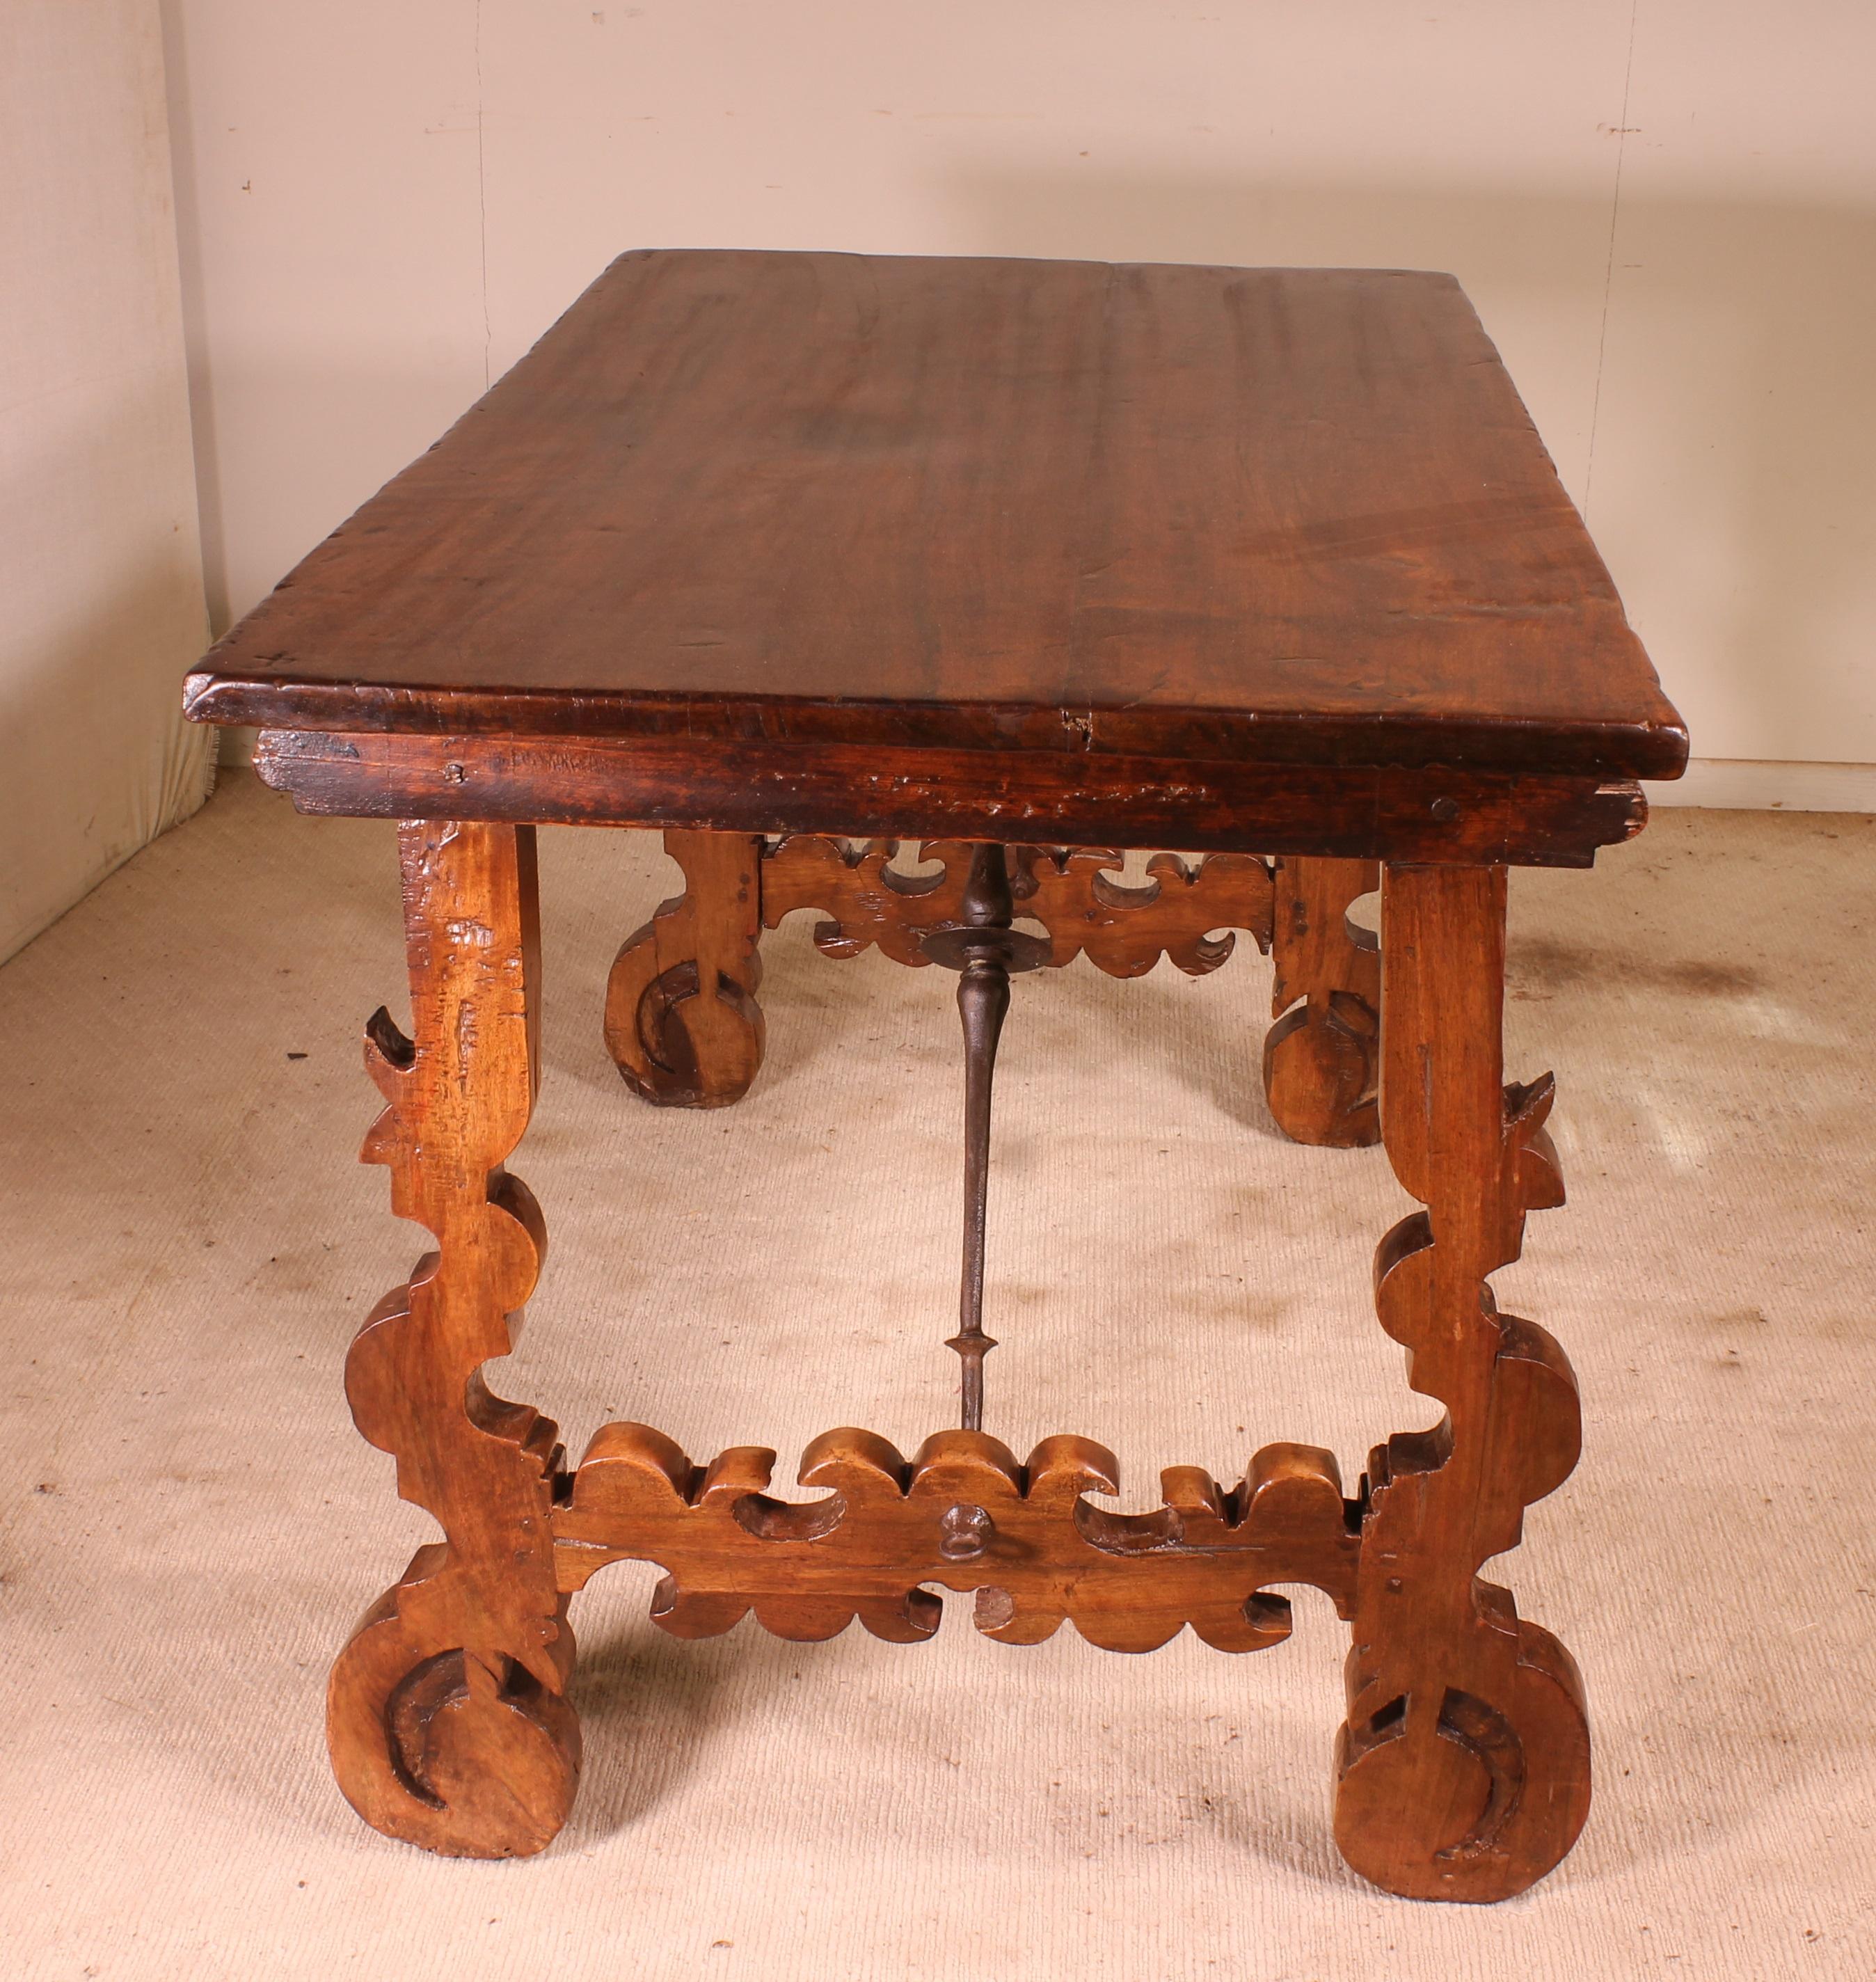 Superb table or desk in walnut from the Spanish renaissance with his original wrought iron spacer
Very beautiful Catalan table with an elegant typically Catalan lyre feet .

Superb original spacer in wrought iron with his old handmade screw
Very